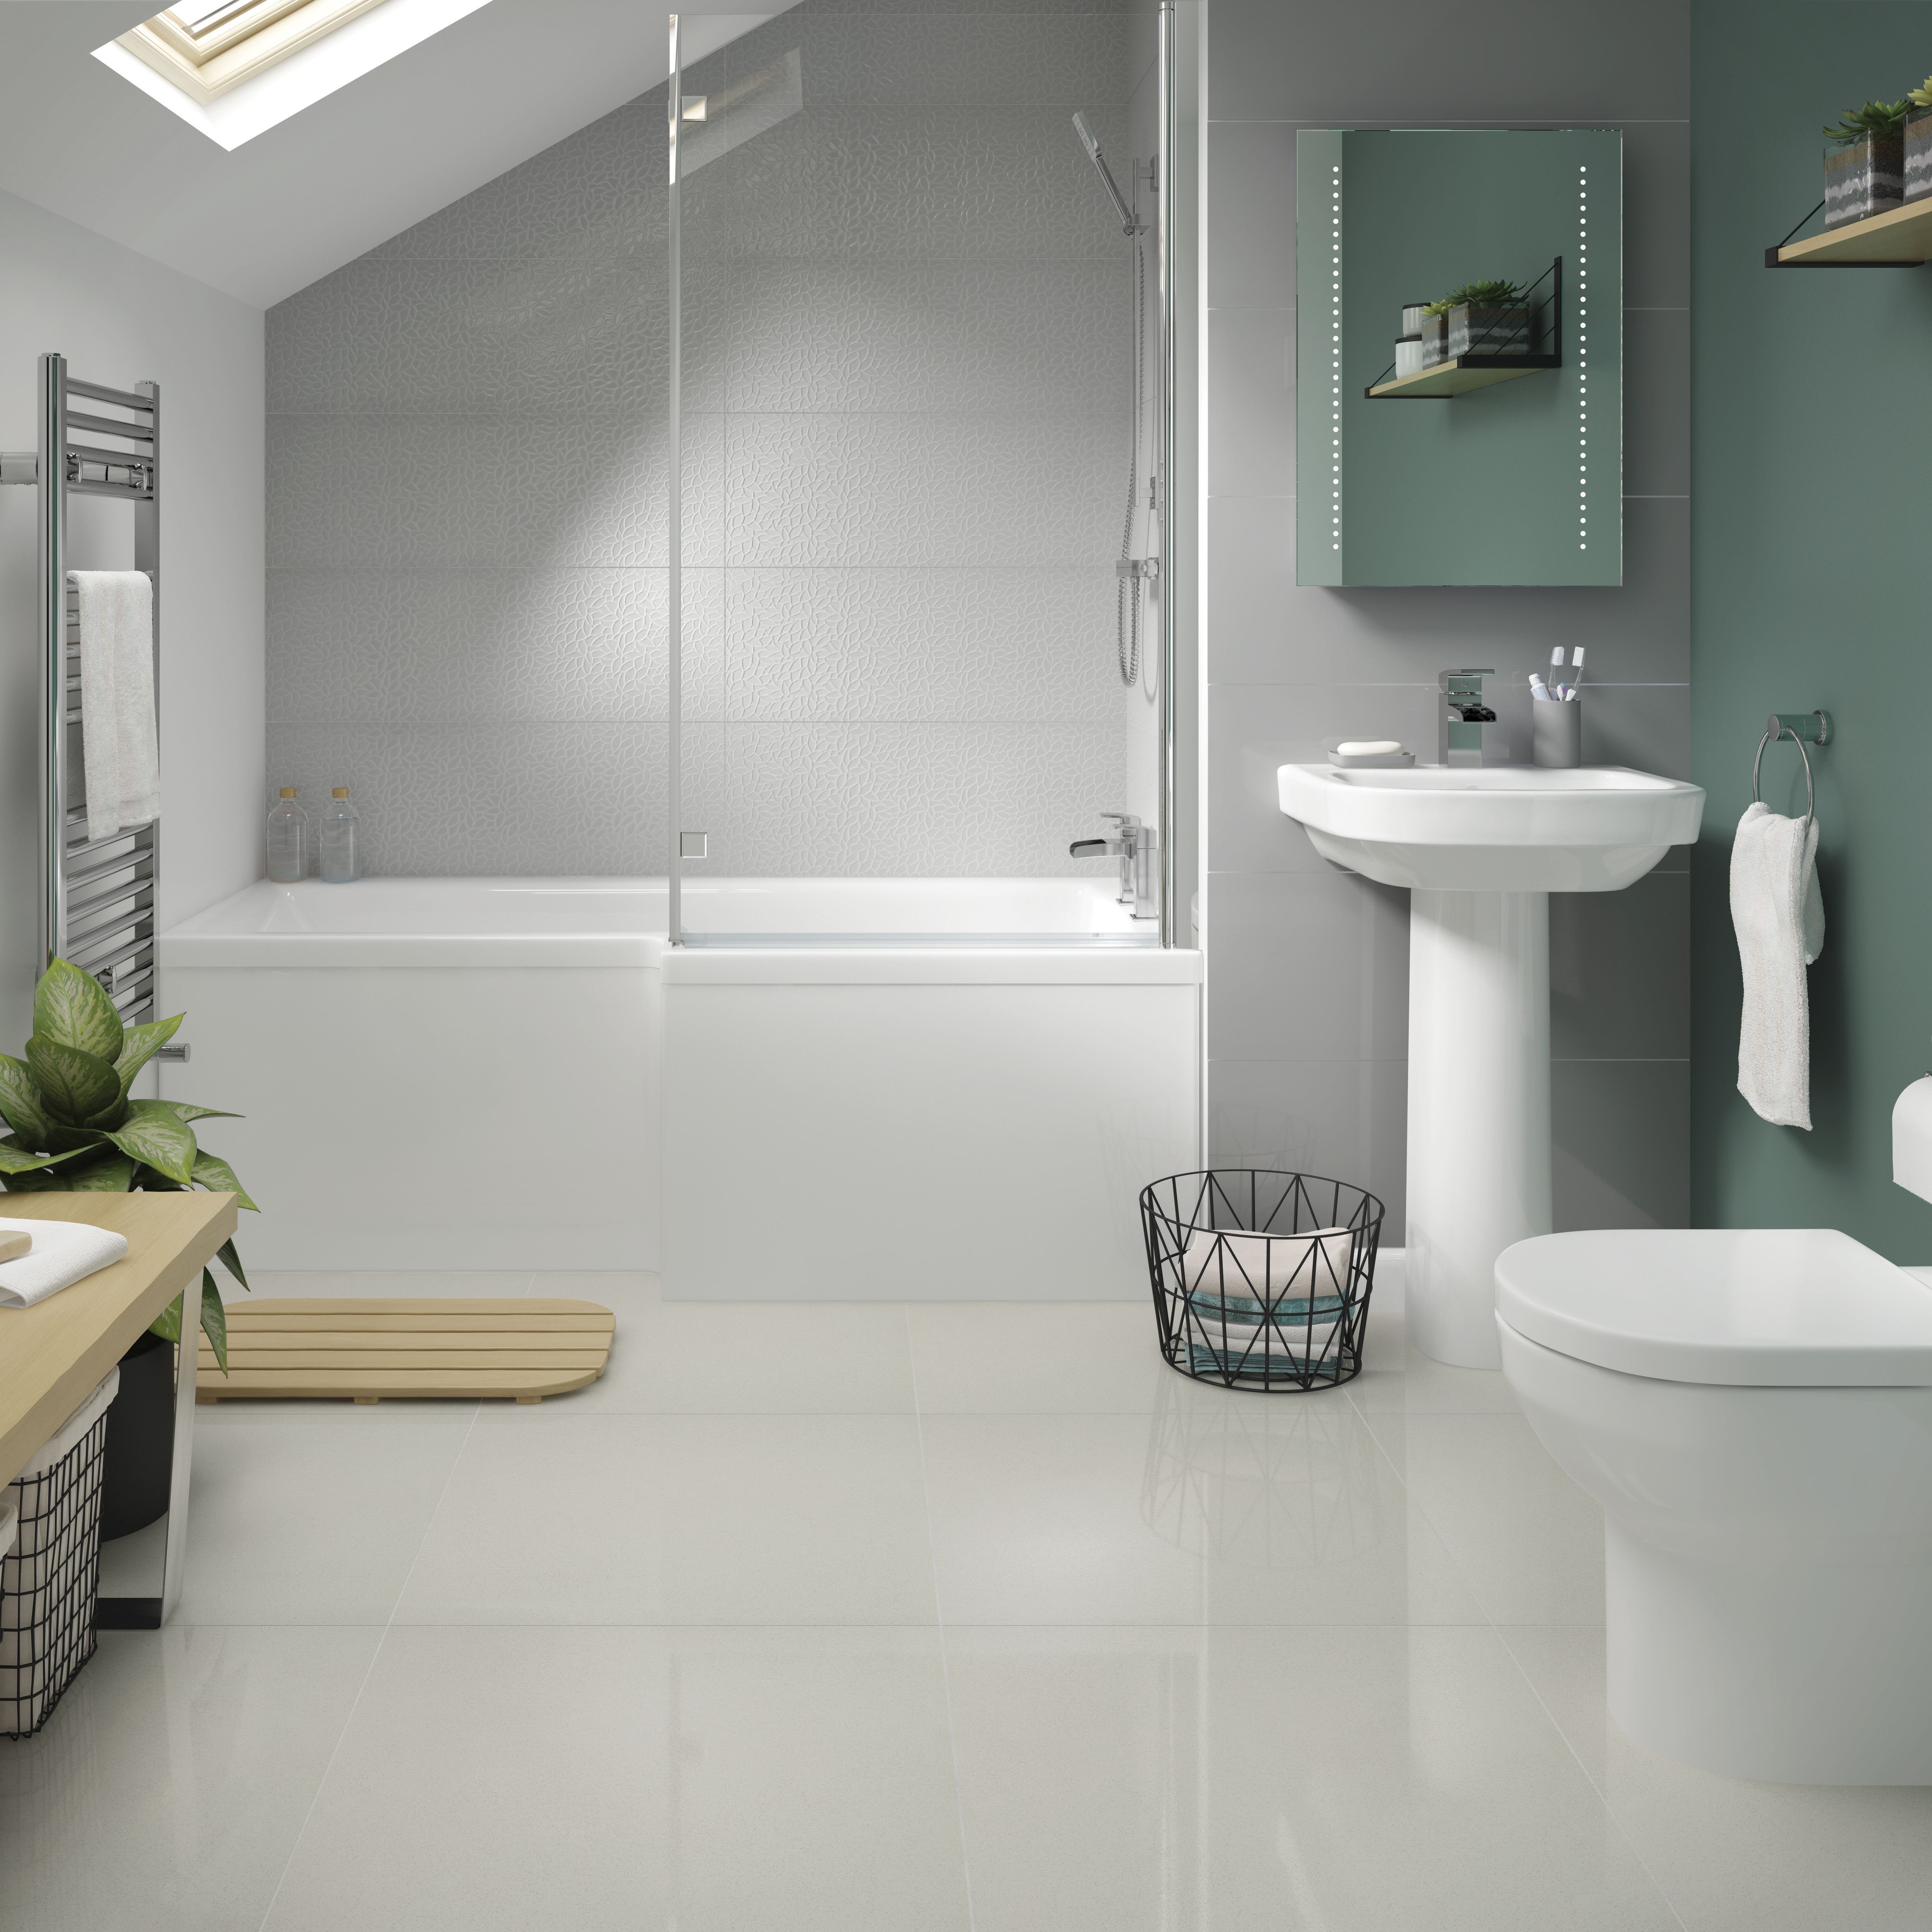 Image of Wickes Boutique Smart White Lux Glazed Porcelain Wall & Floor Tile - 600 x 600mm